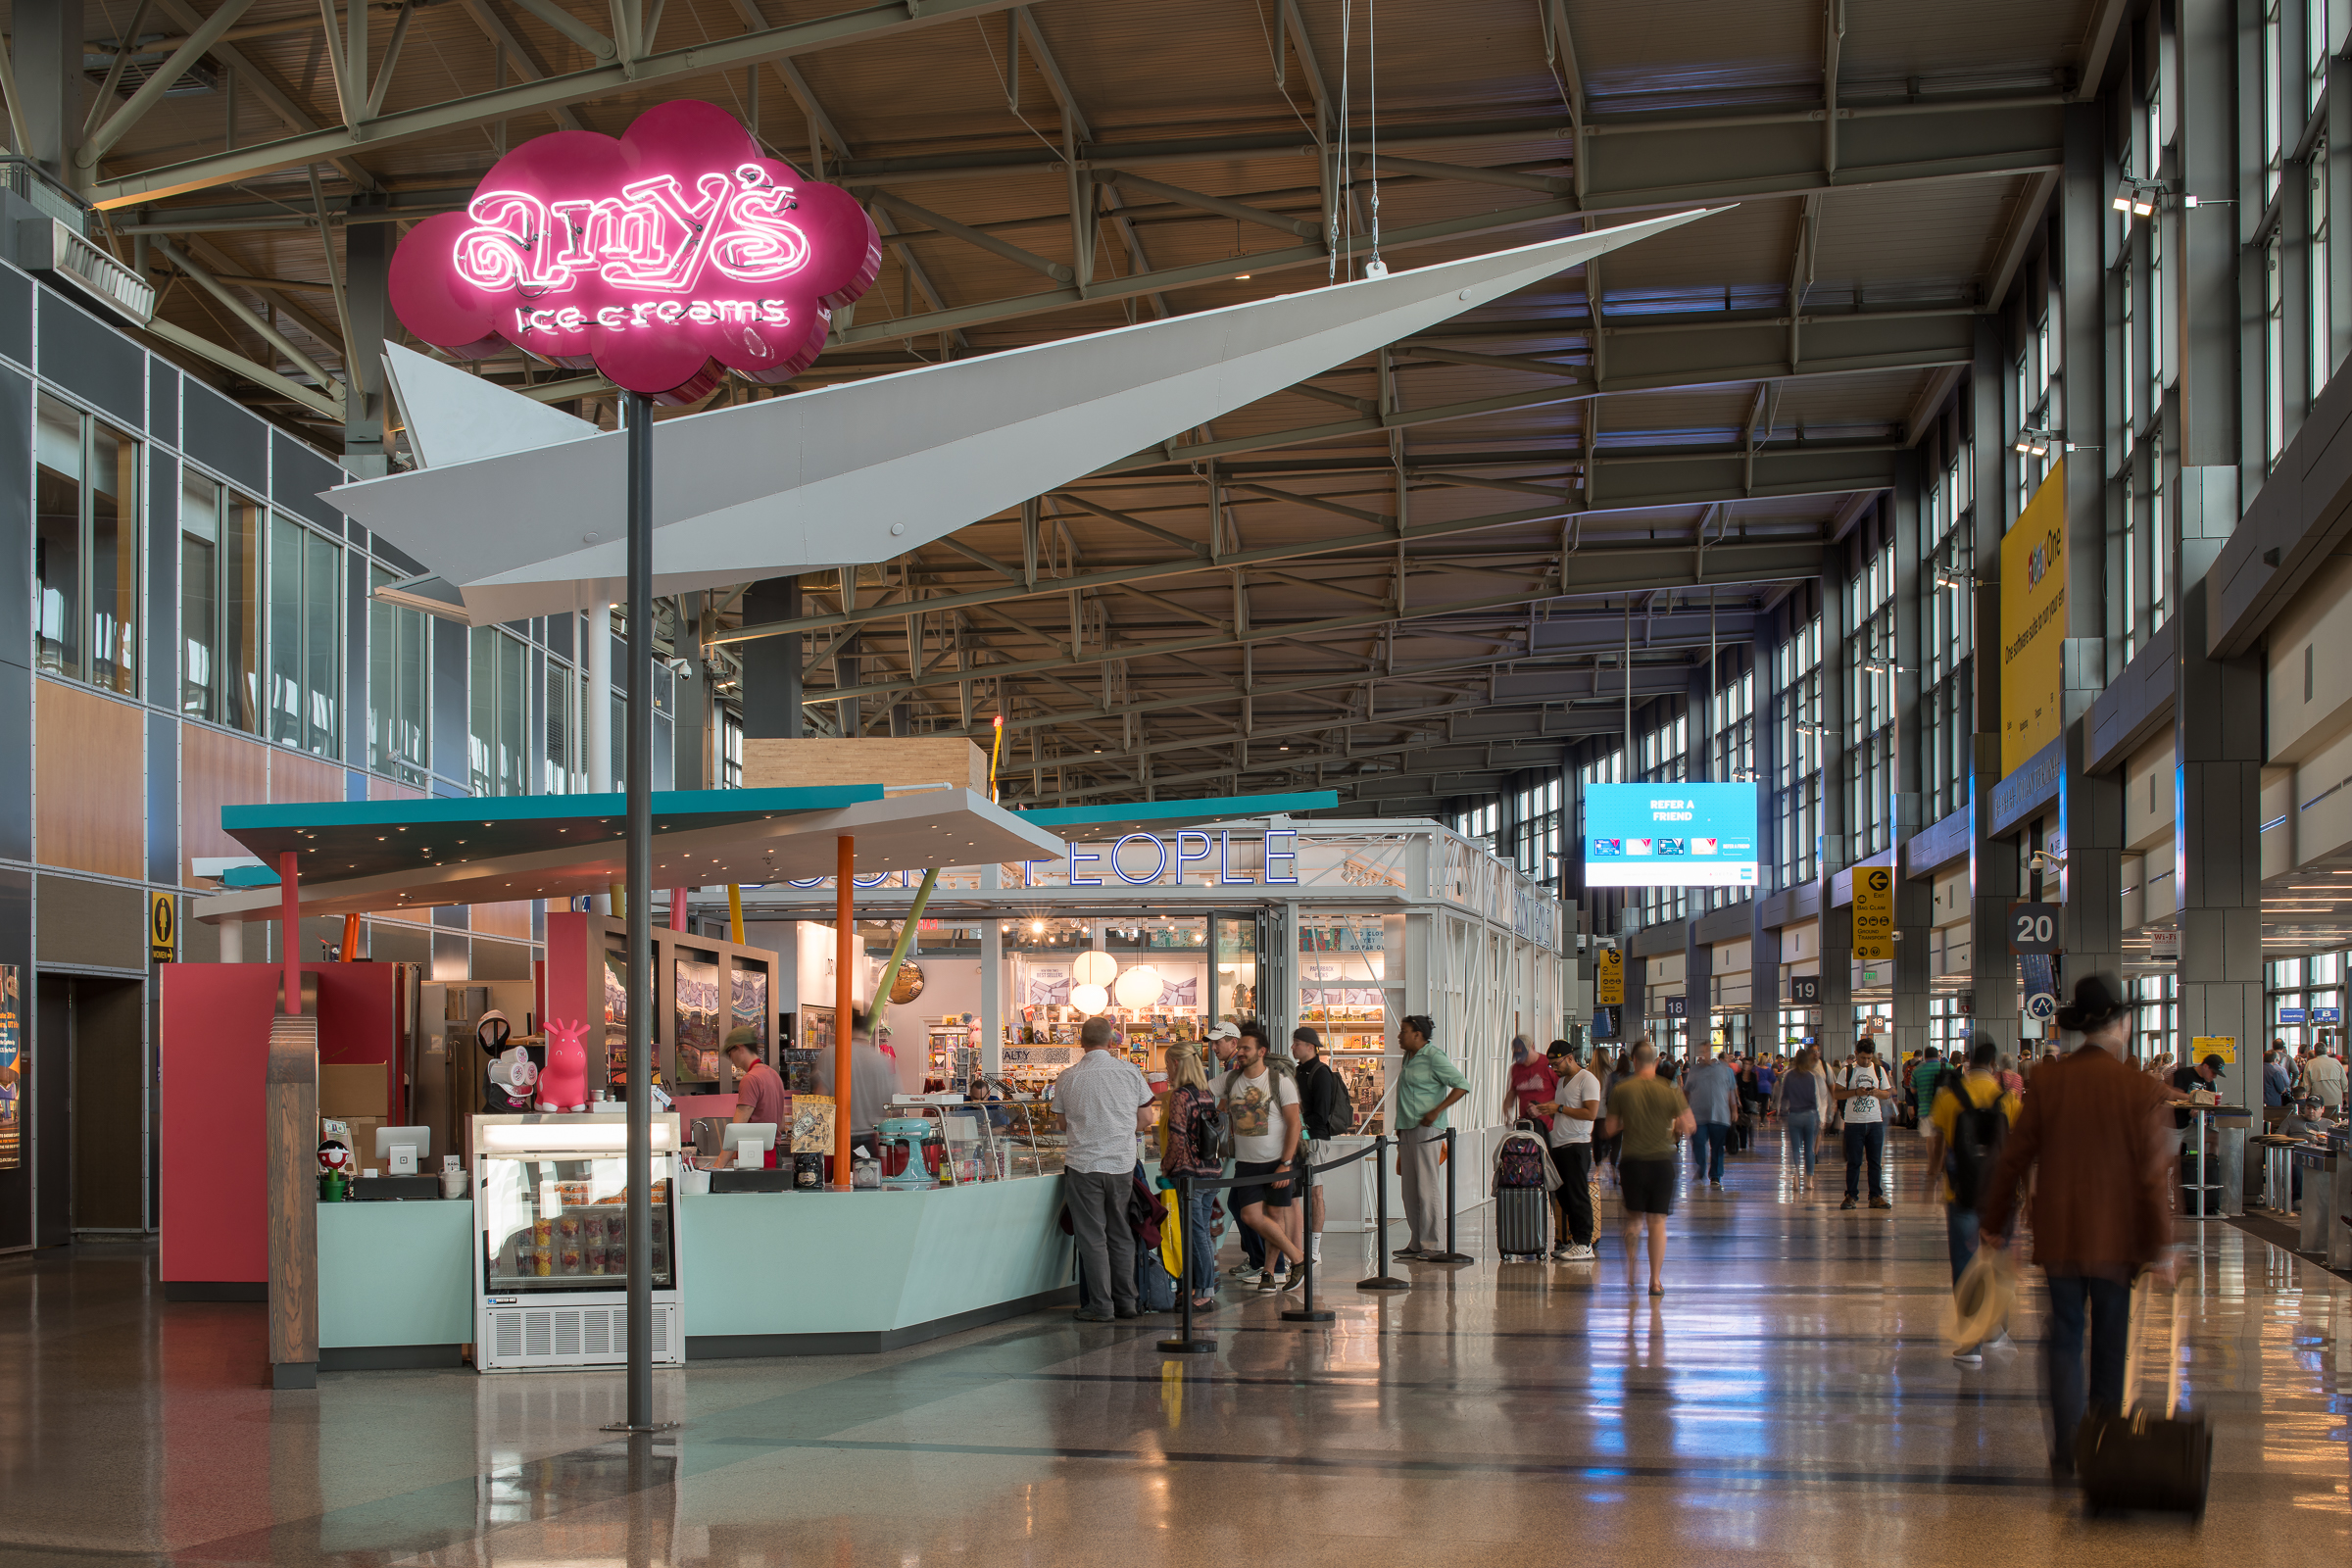   AMY’S ICE CREAMS AIRPORT LOCATION   Location: Austin-Bergstrom International Airport  Size: 690 sf  Amy's Ice Creams at the Austin-Bergstrom International Airport is a whimsical service and kitchen kiosk. We drew inspiration from the culture and at